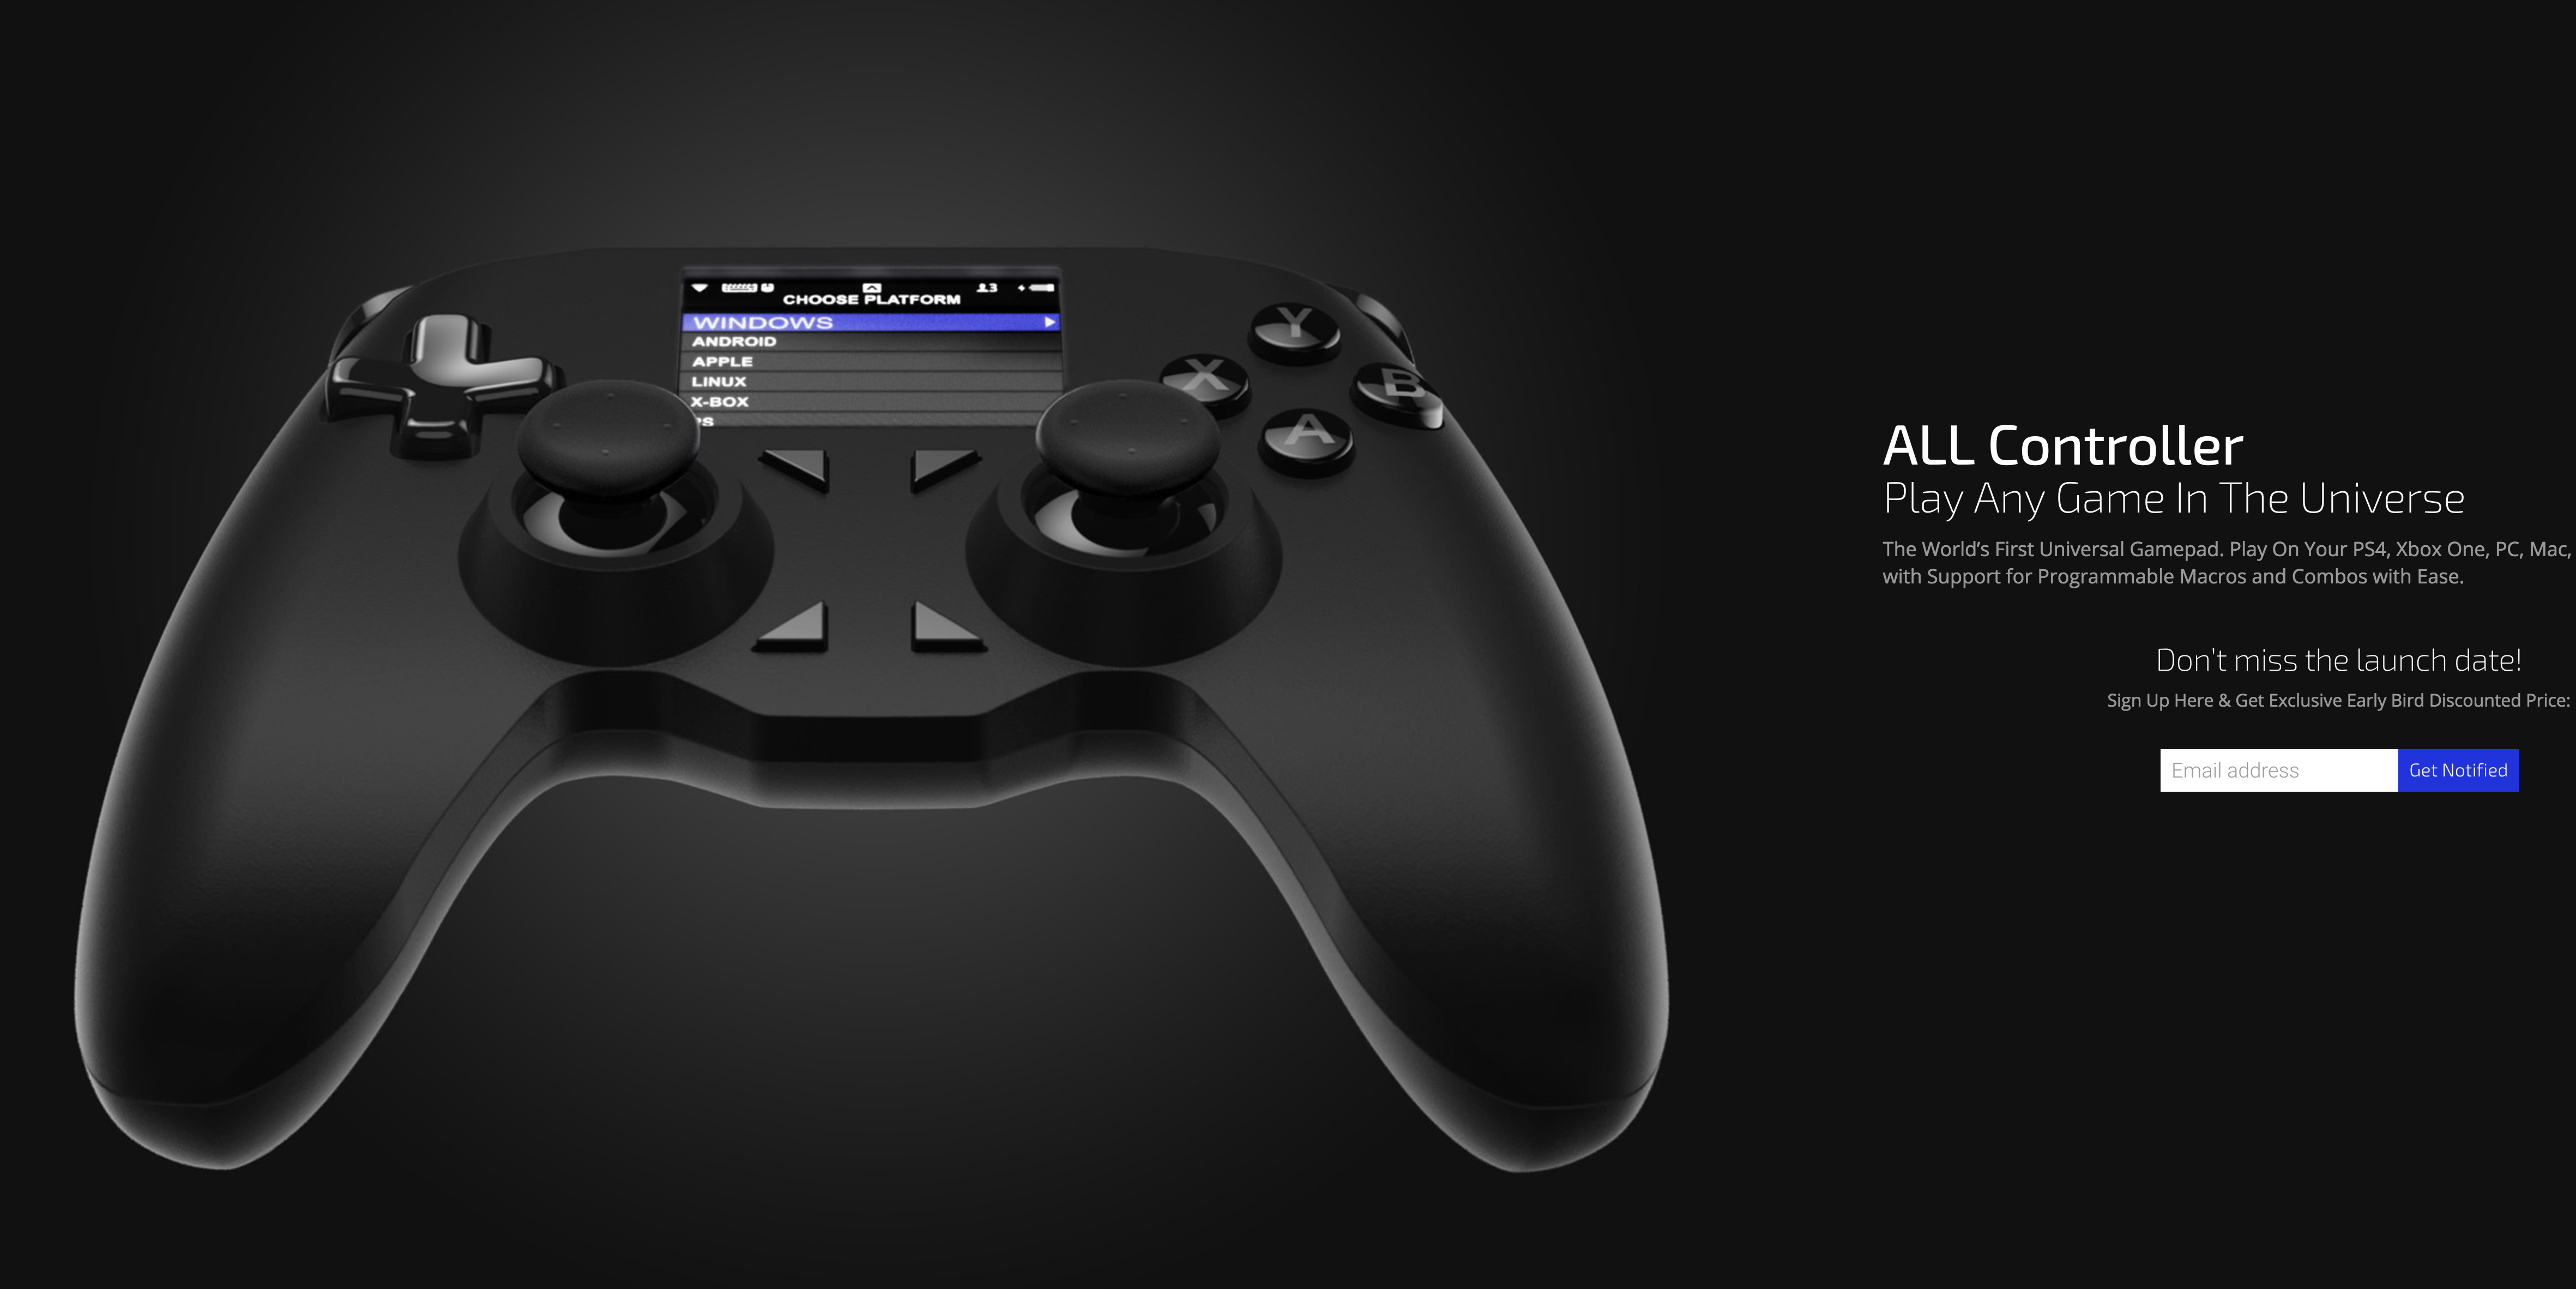 Player controller. Xbox Controller ps4 Controller. Ps1 Controllers all. Геймпад Минимализм. Пиксельный геймпад.